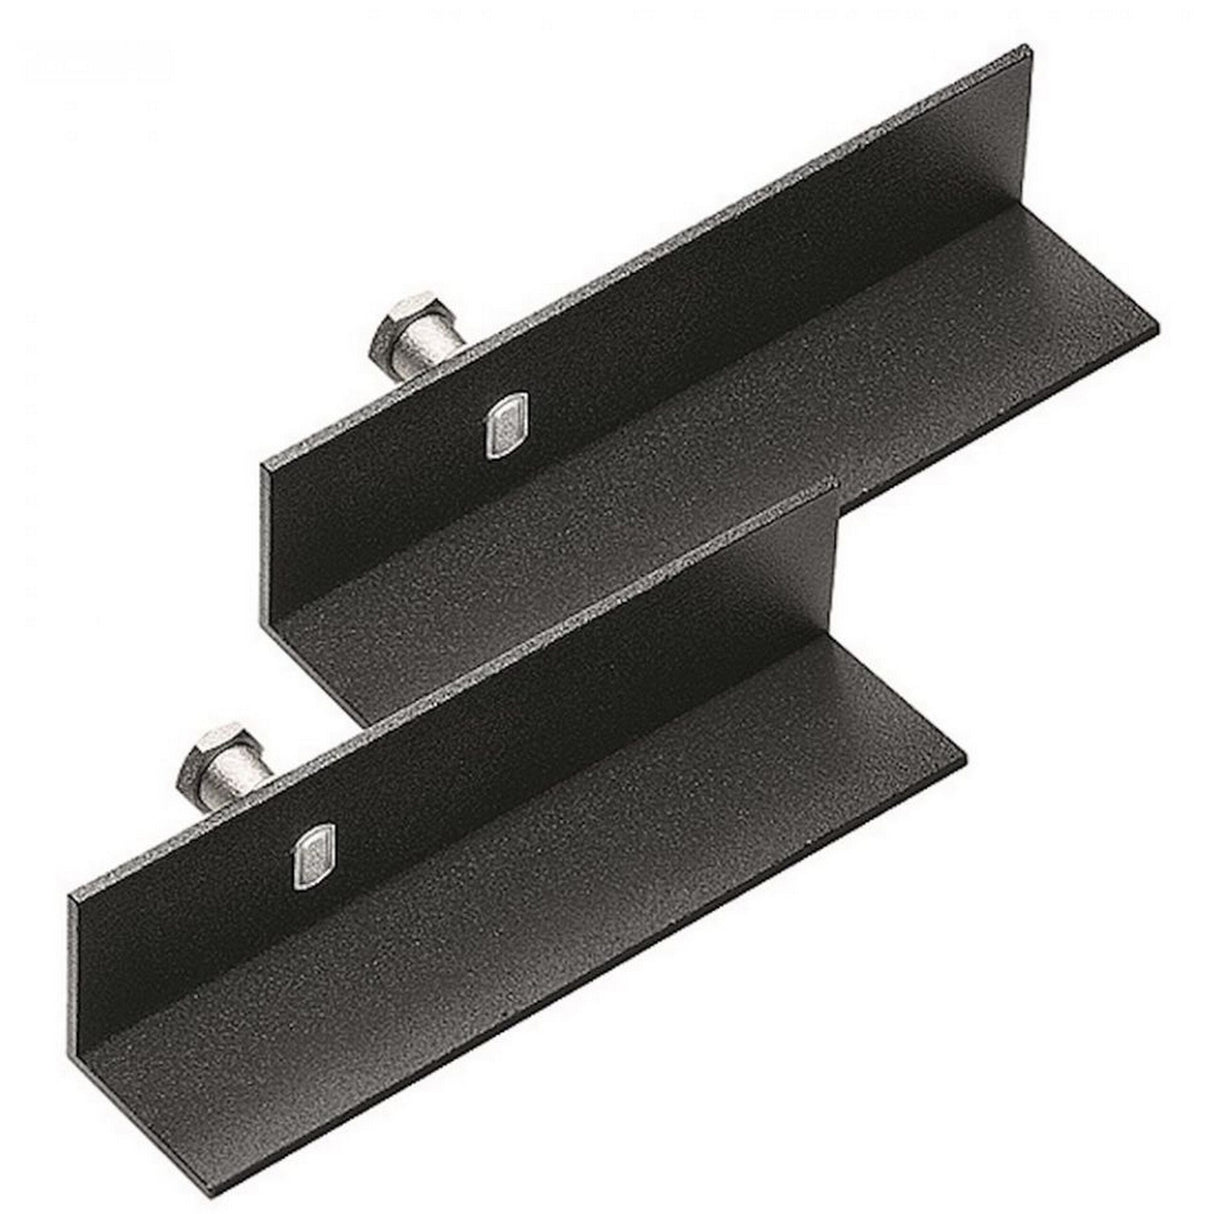 Manfrotto 041 L Brackets for Support Shelves, 2 Pack